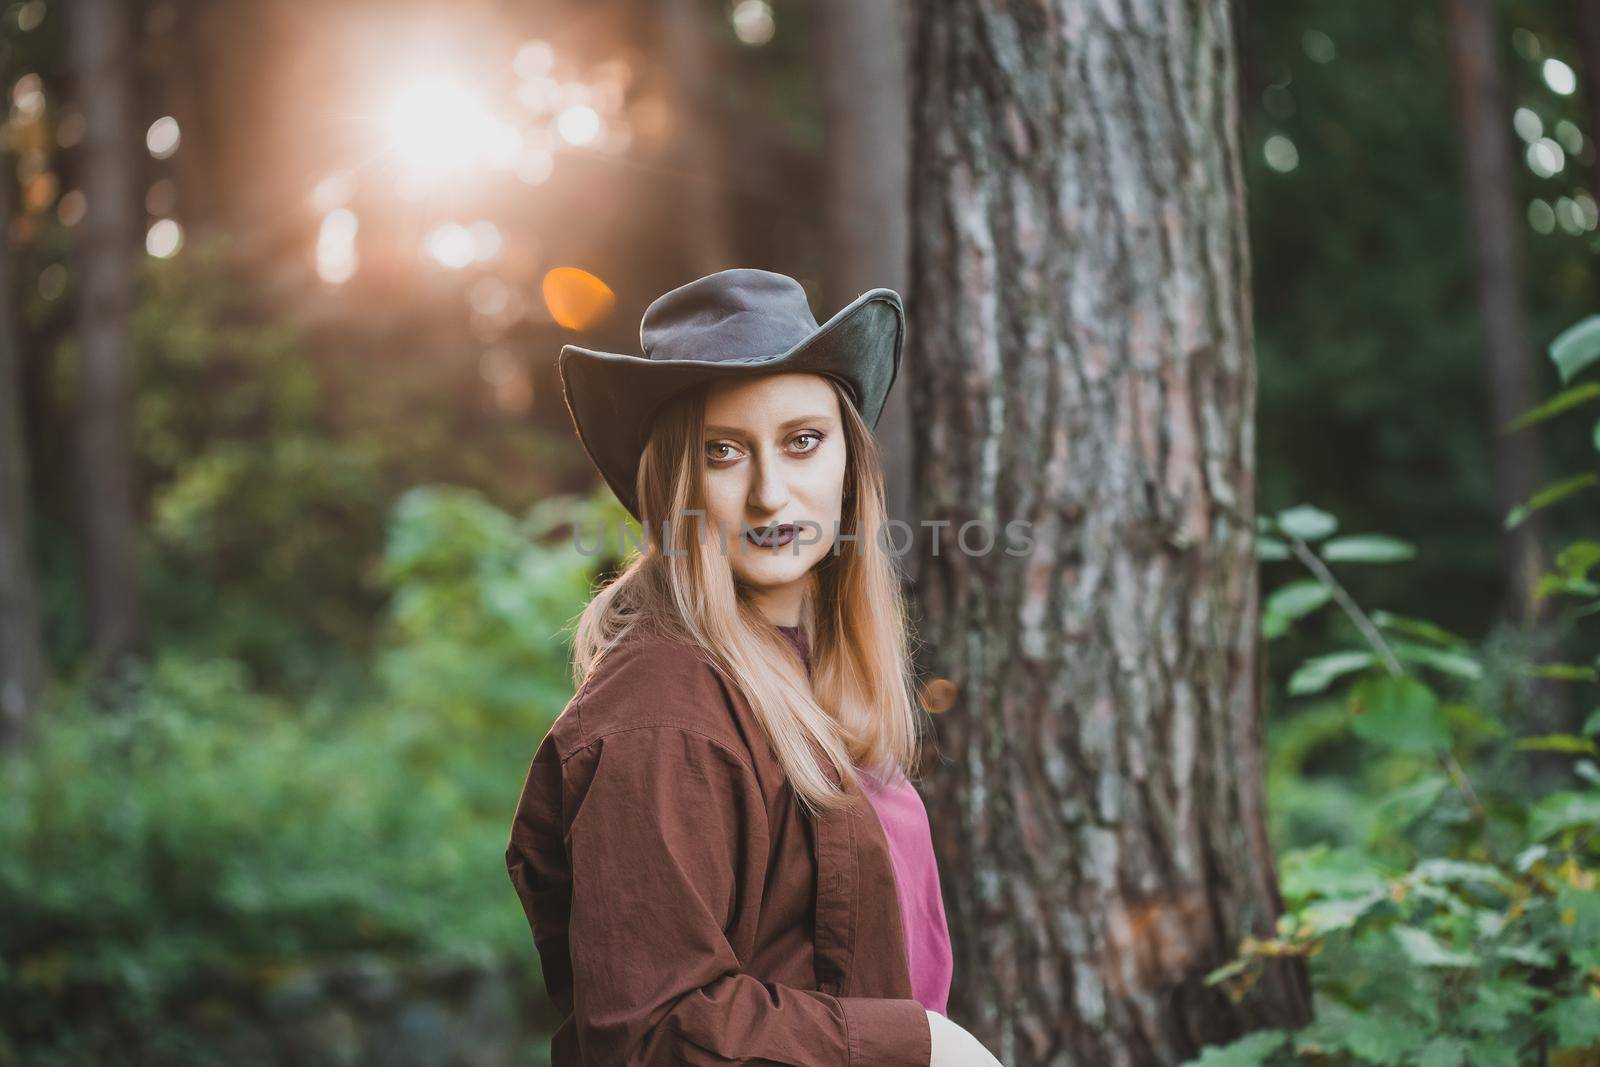 Country style fashion portrait of a blond woman wearing a leather cowboy hat and brown shirt standing in the forest. Dramatic heavy make up with dark lipstick. Halloween costume concept.